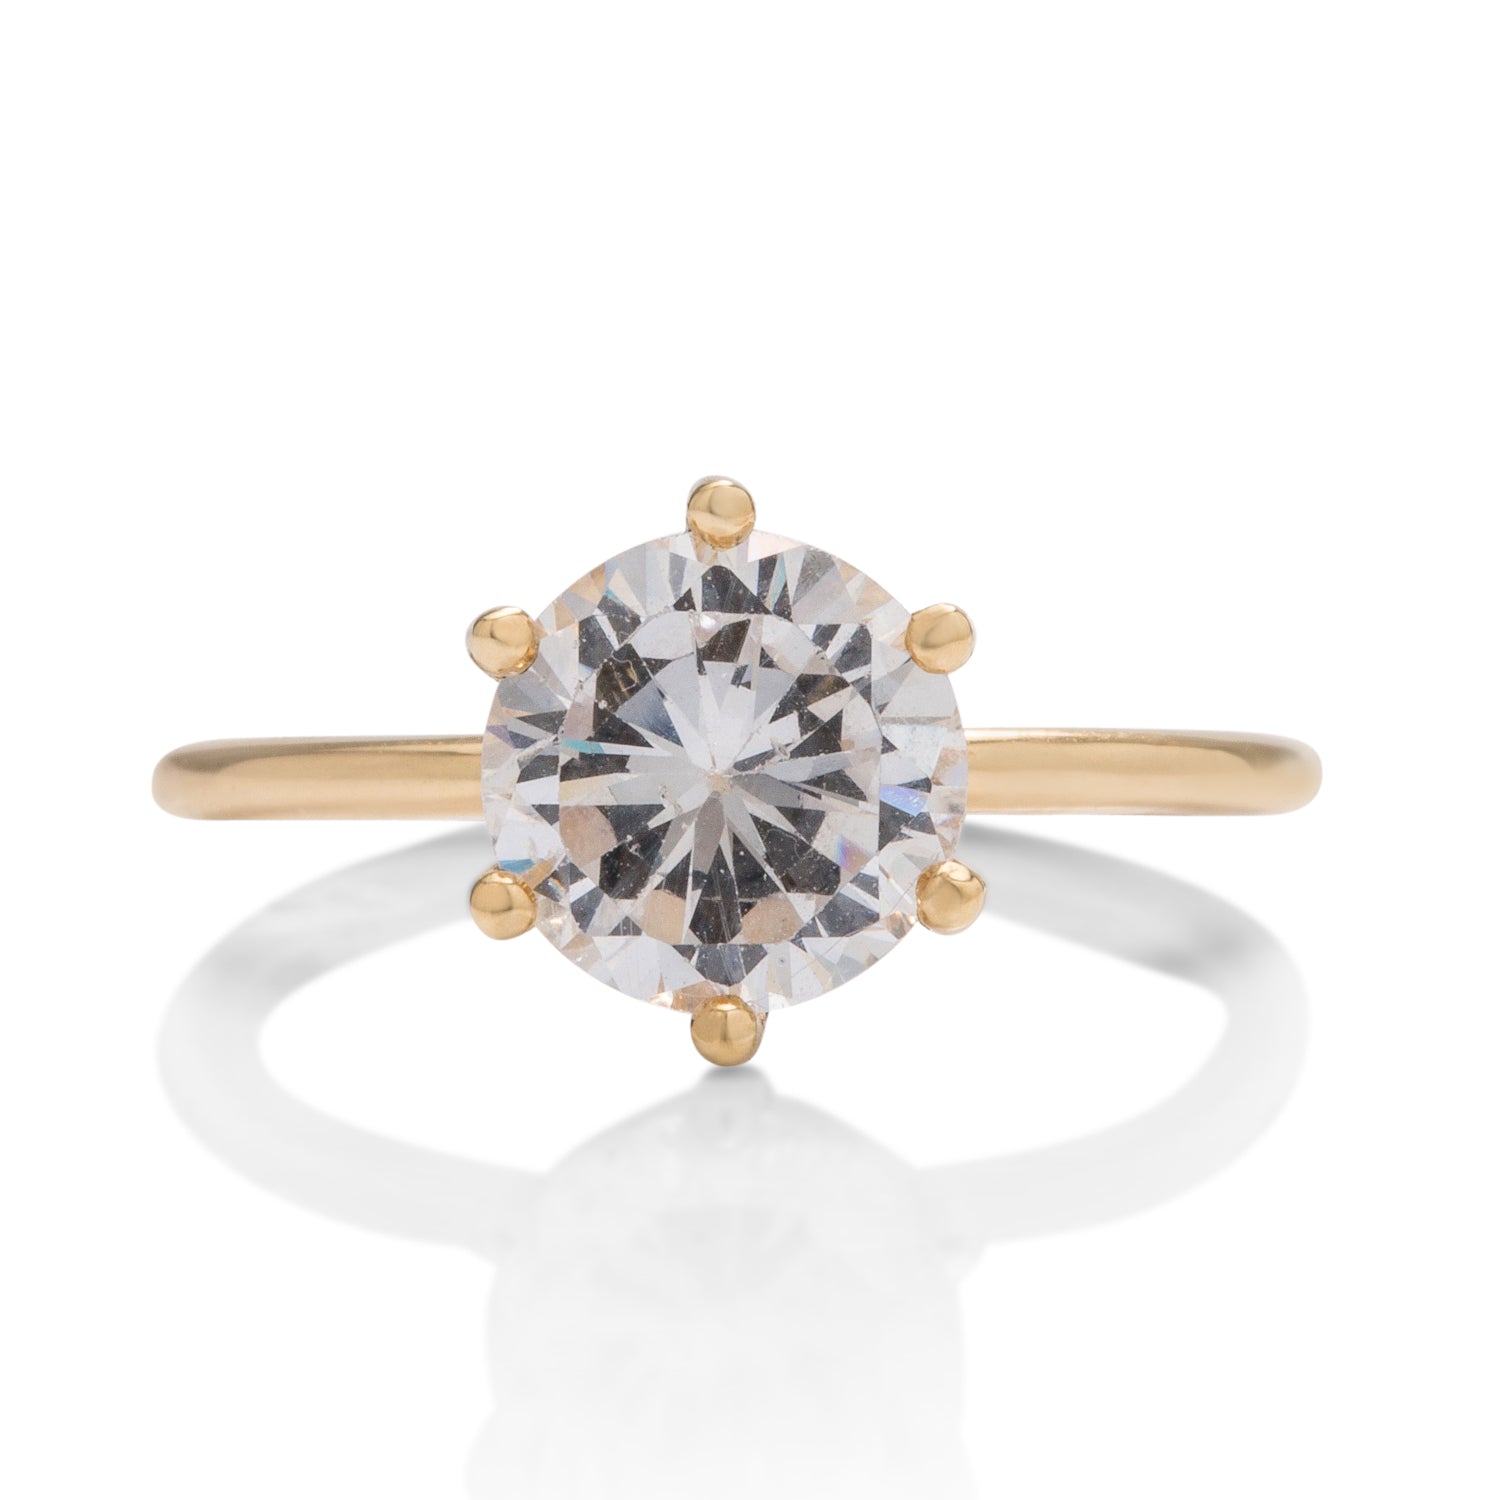 18k Gold 6 Prong Solitaire Engagement Ring Setting - Charles Koll Jewellers